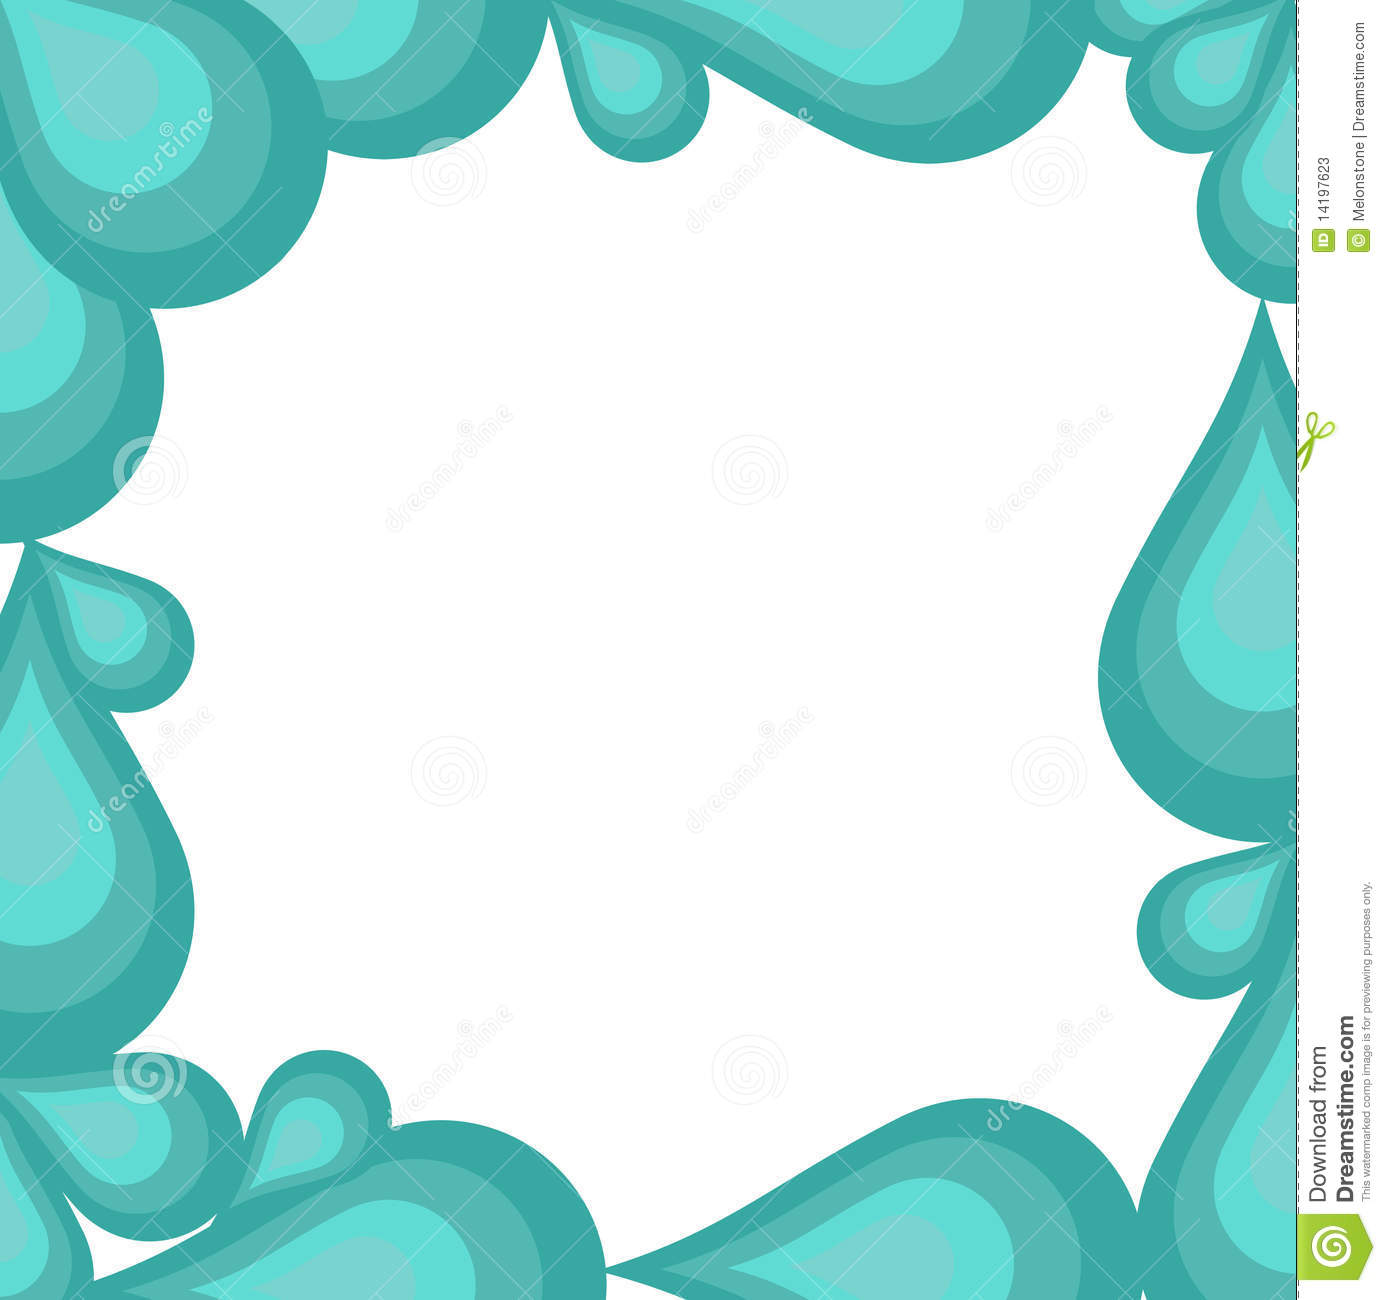 Border Or Frame Of Turquoise Blue Water Drops Or Droplets With Blank    